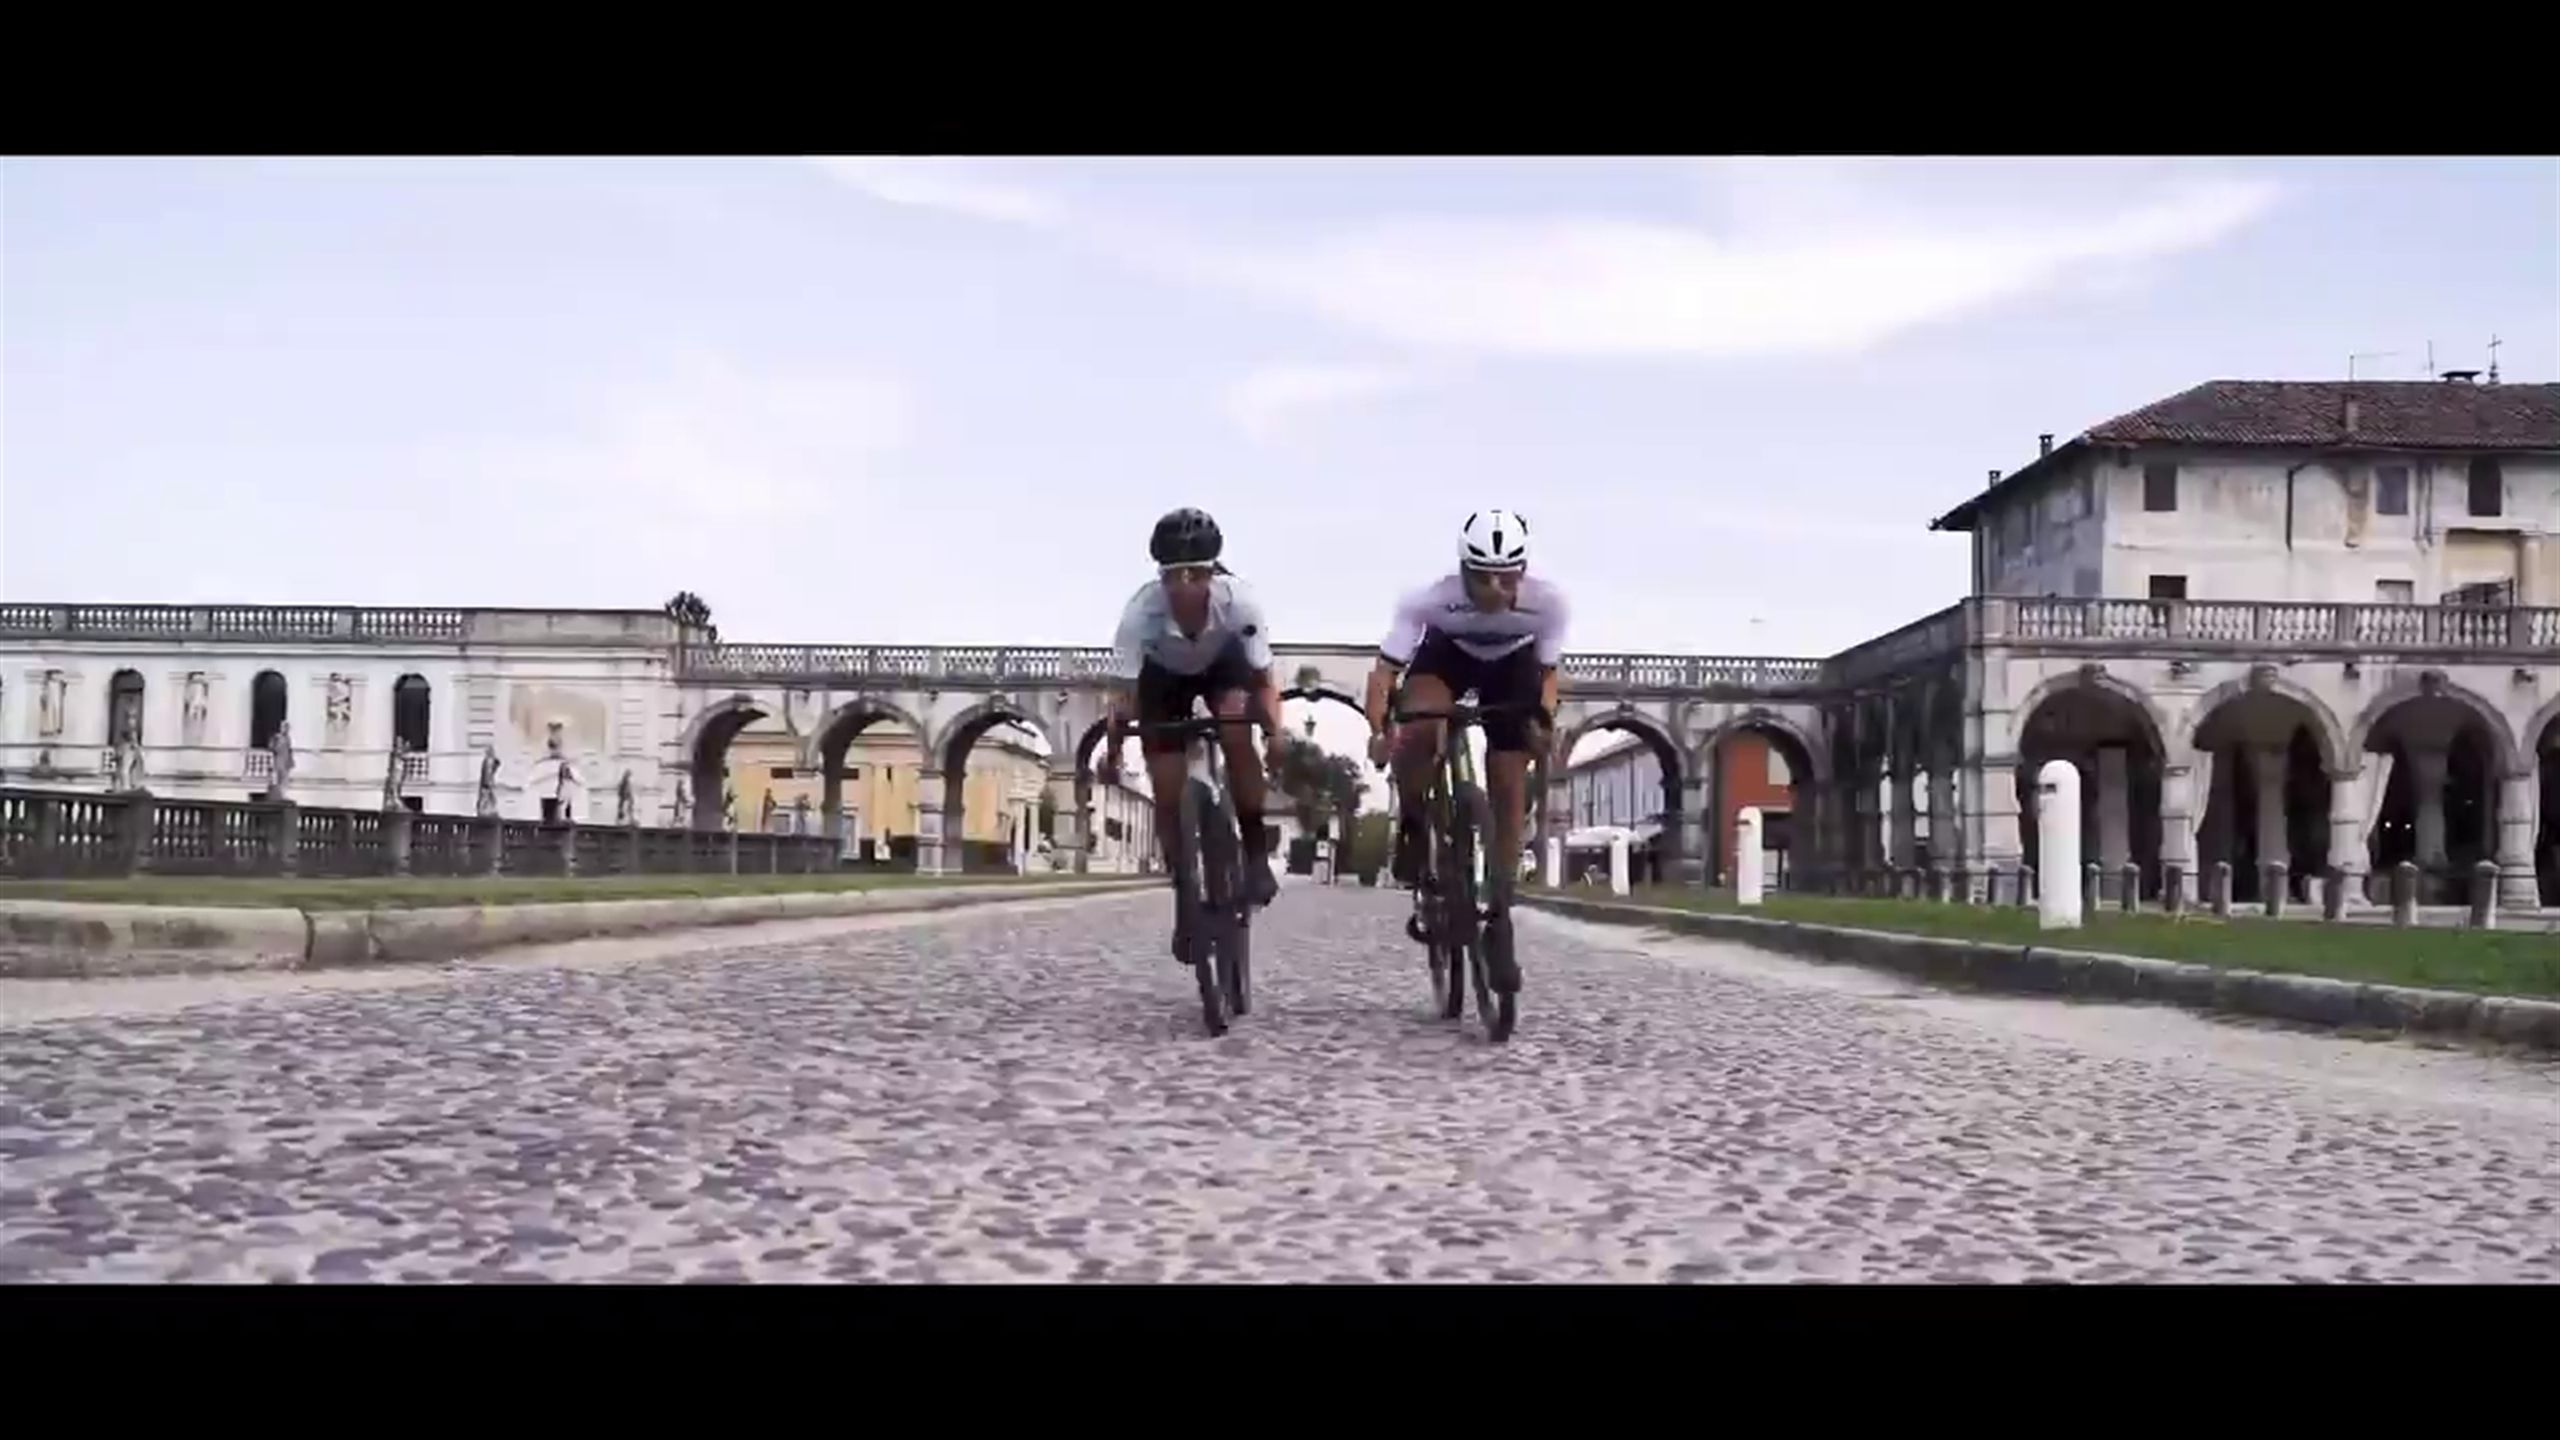 Dont miss this weekend The inaugural UCI Gravel World Championships - Cycling - Gravel video